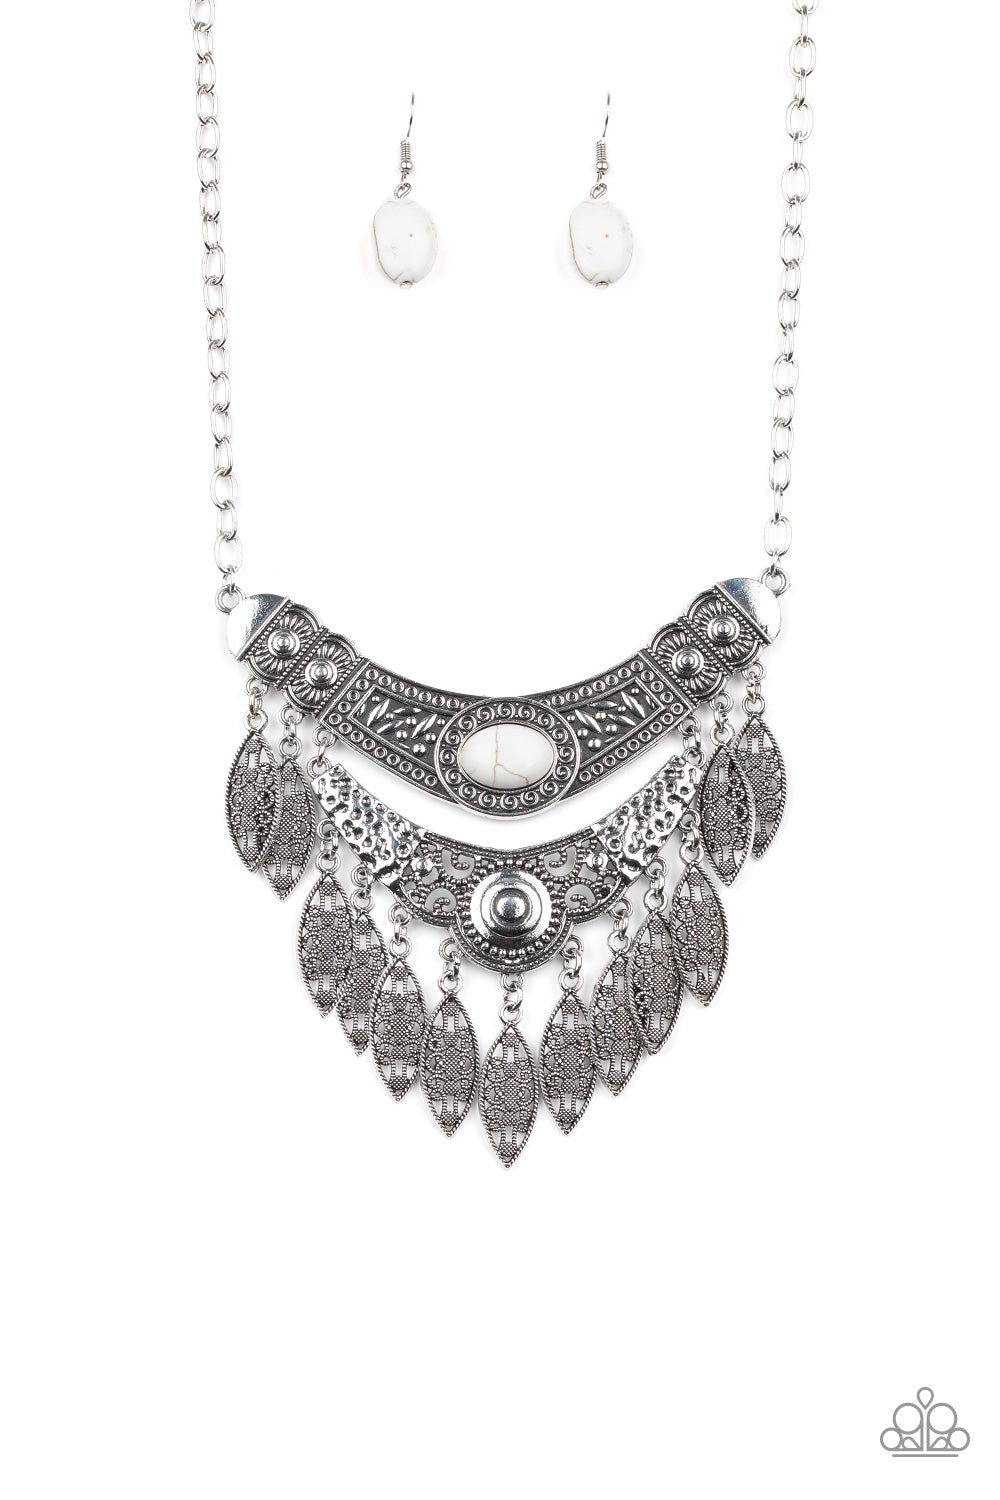 Paparazzi Accessories  - Island Queen - #N150 White Necklace